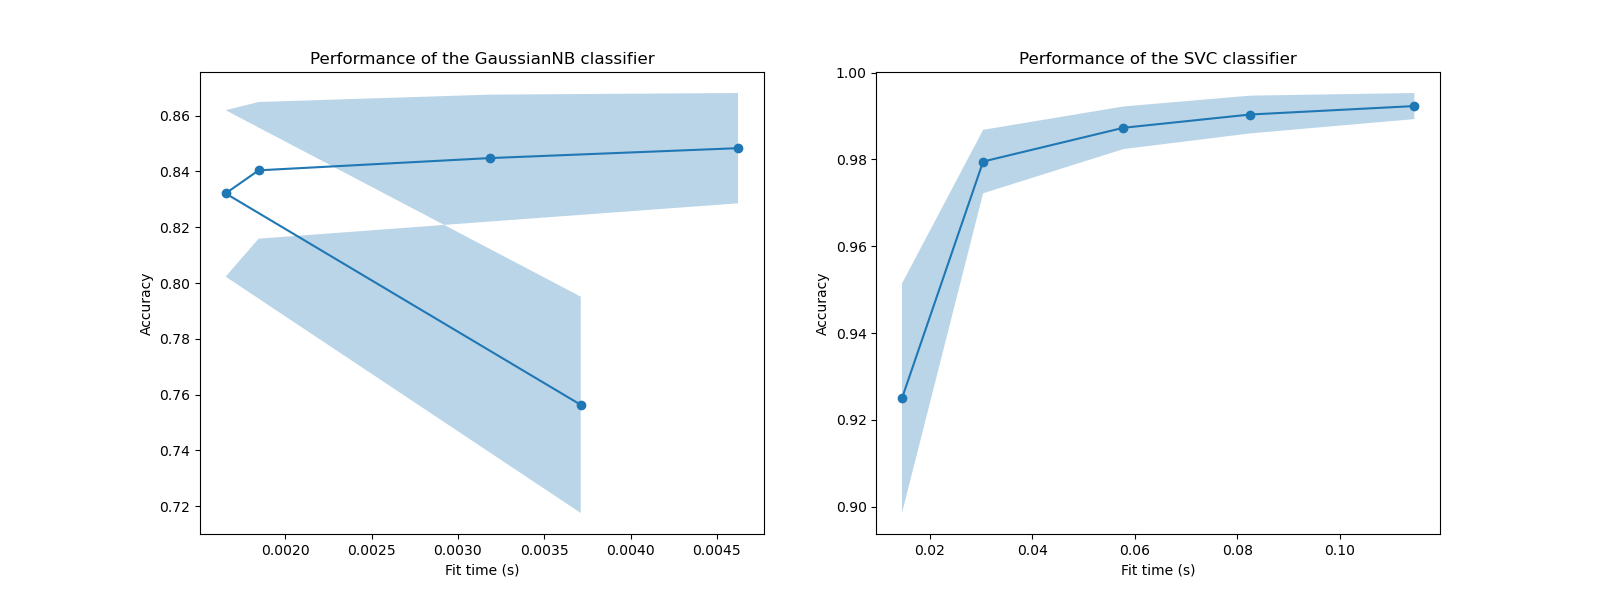 Performance of the GaussianNB classifier, Performance of the SVC classifier